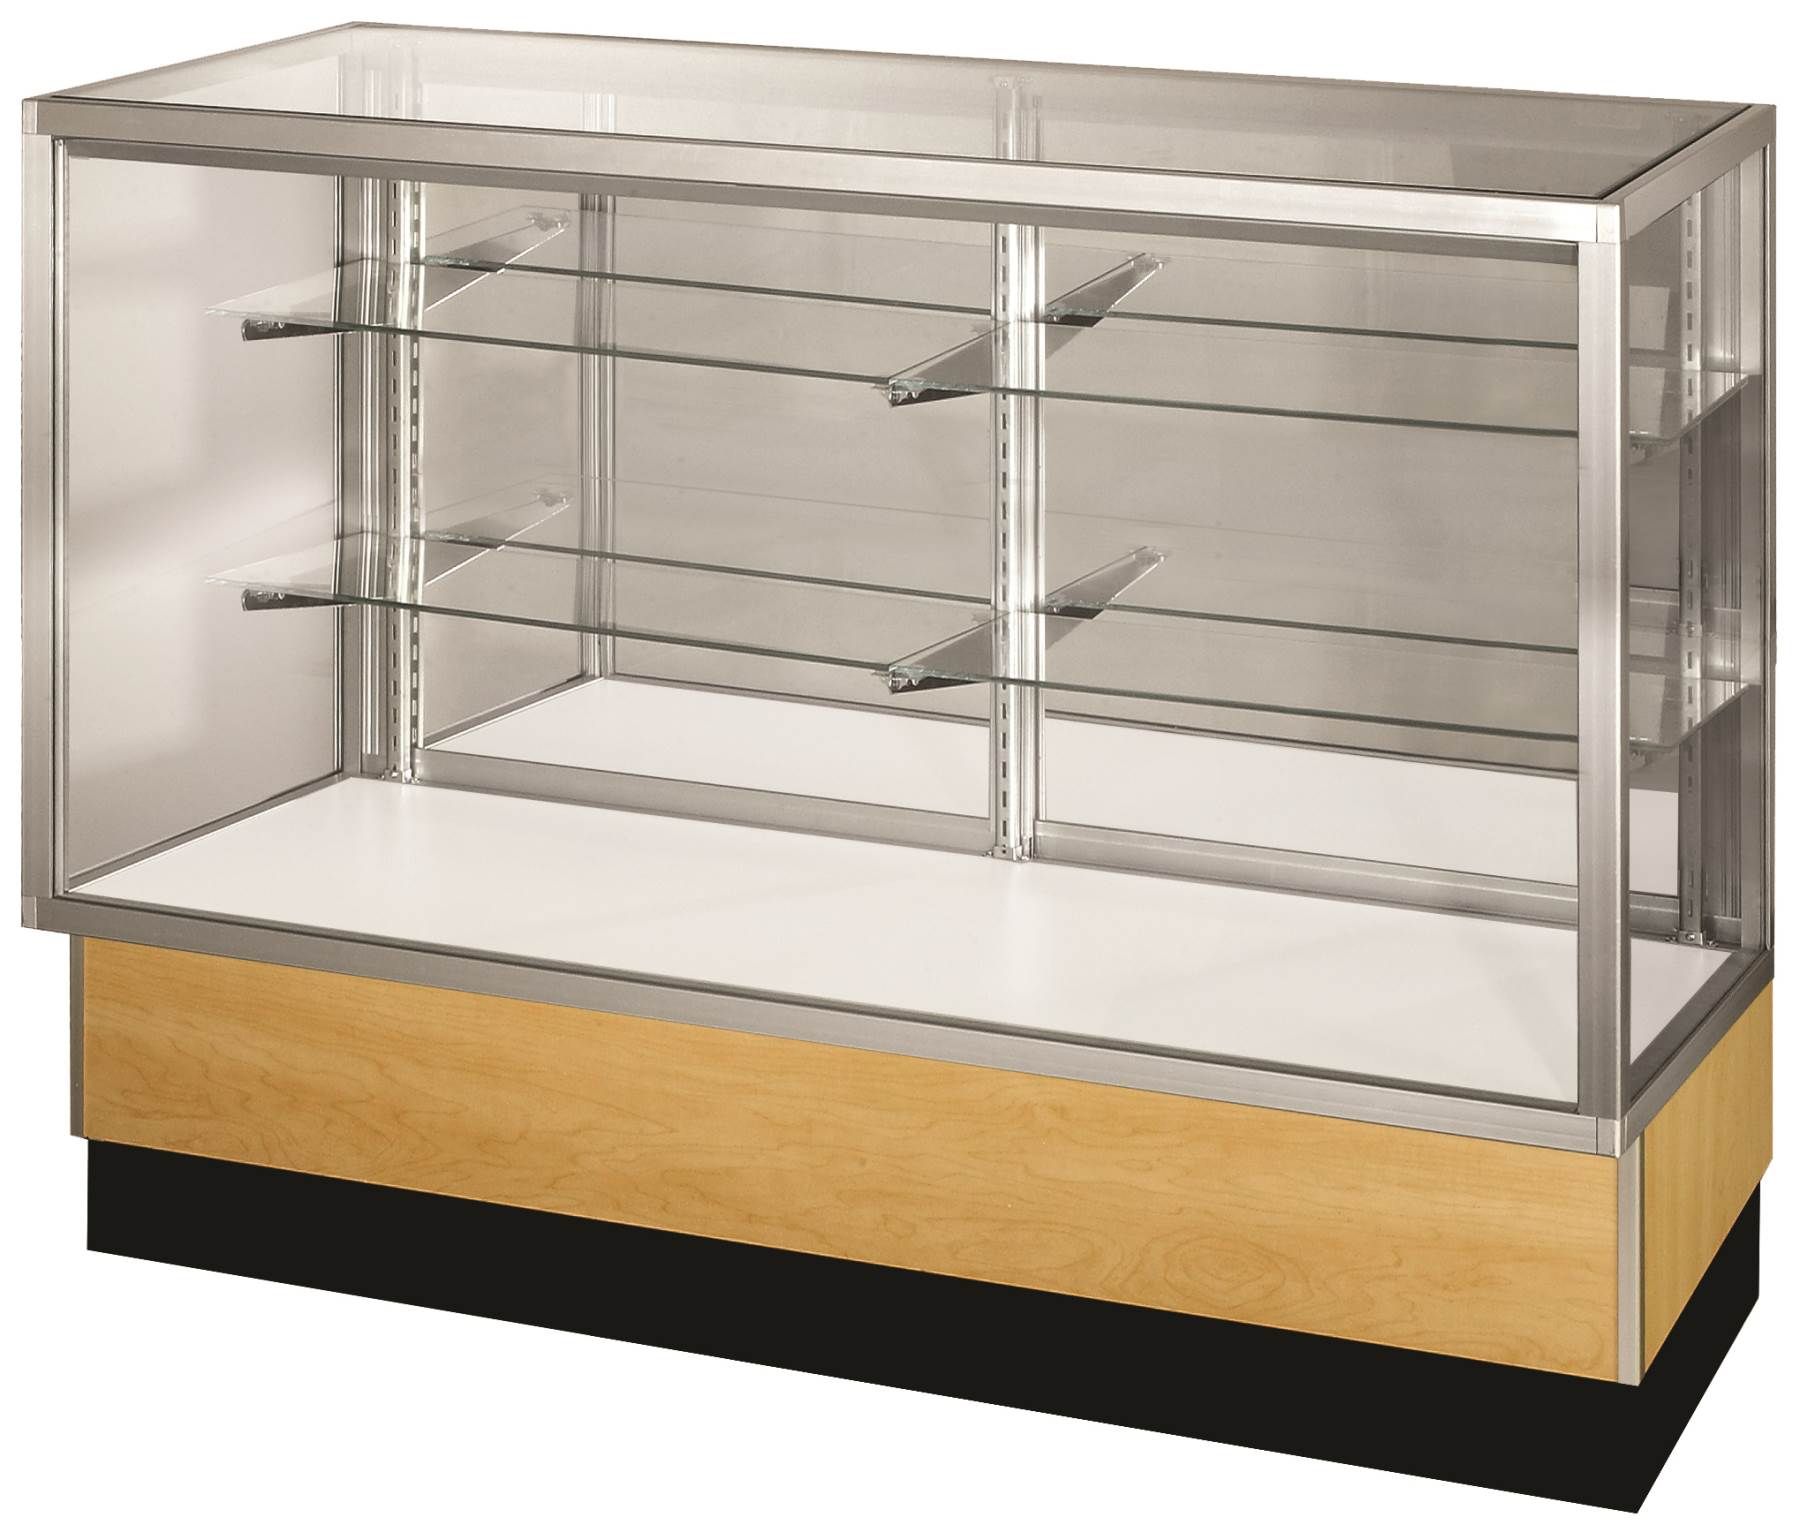 Full Vision Glass Display Case Showcase 60 Long The